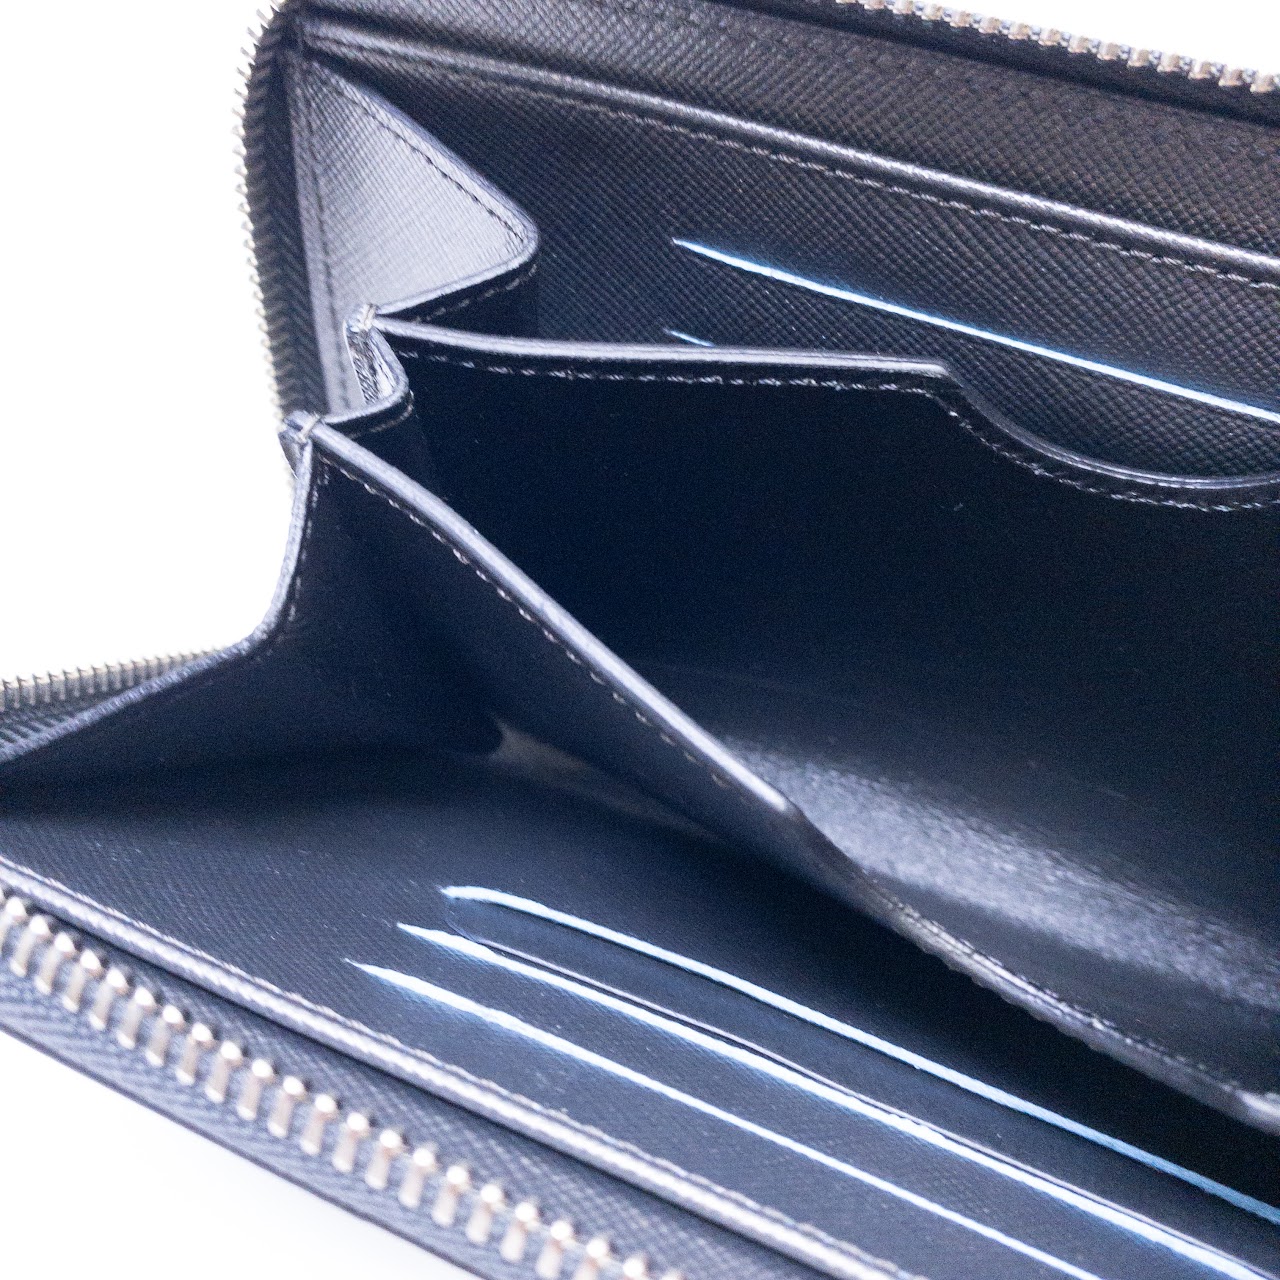 T. Anthony Graphite Leather  Wallet